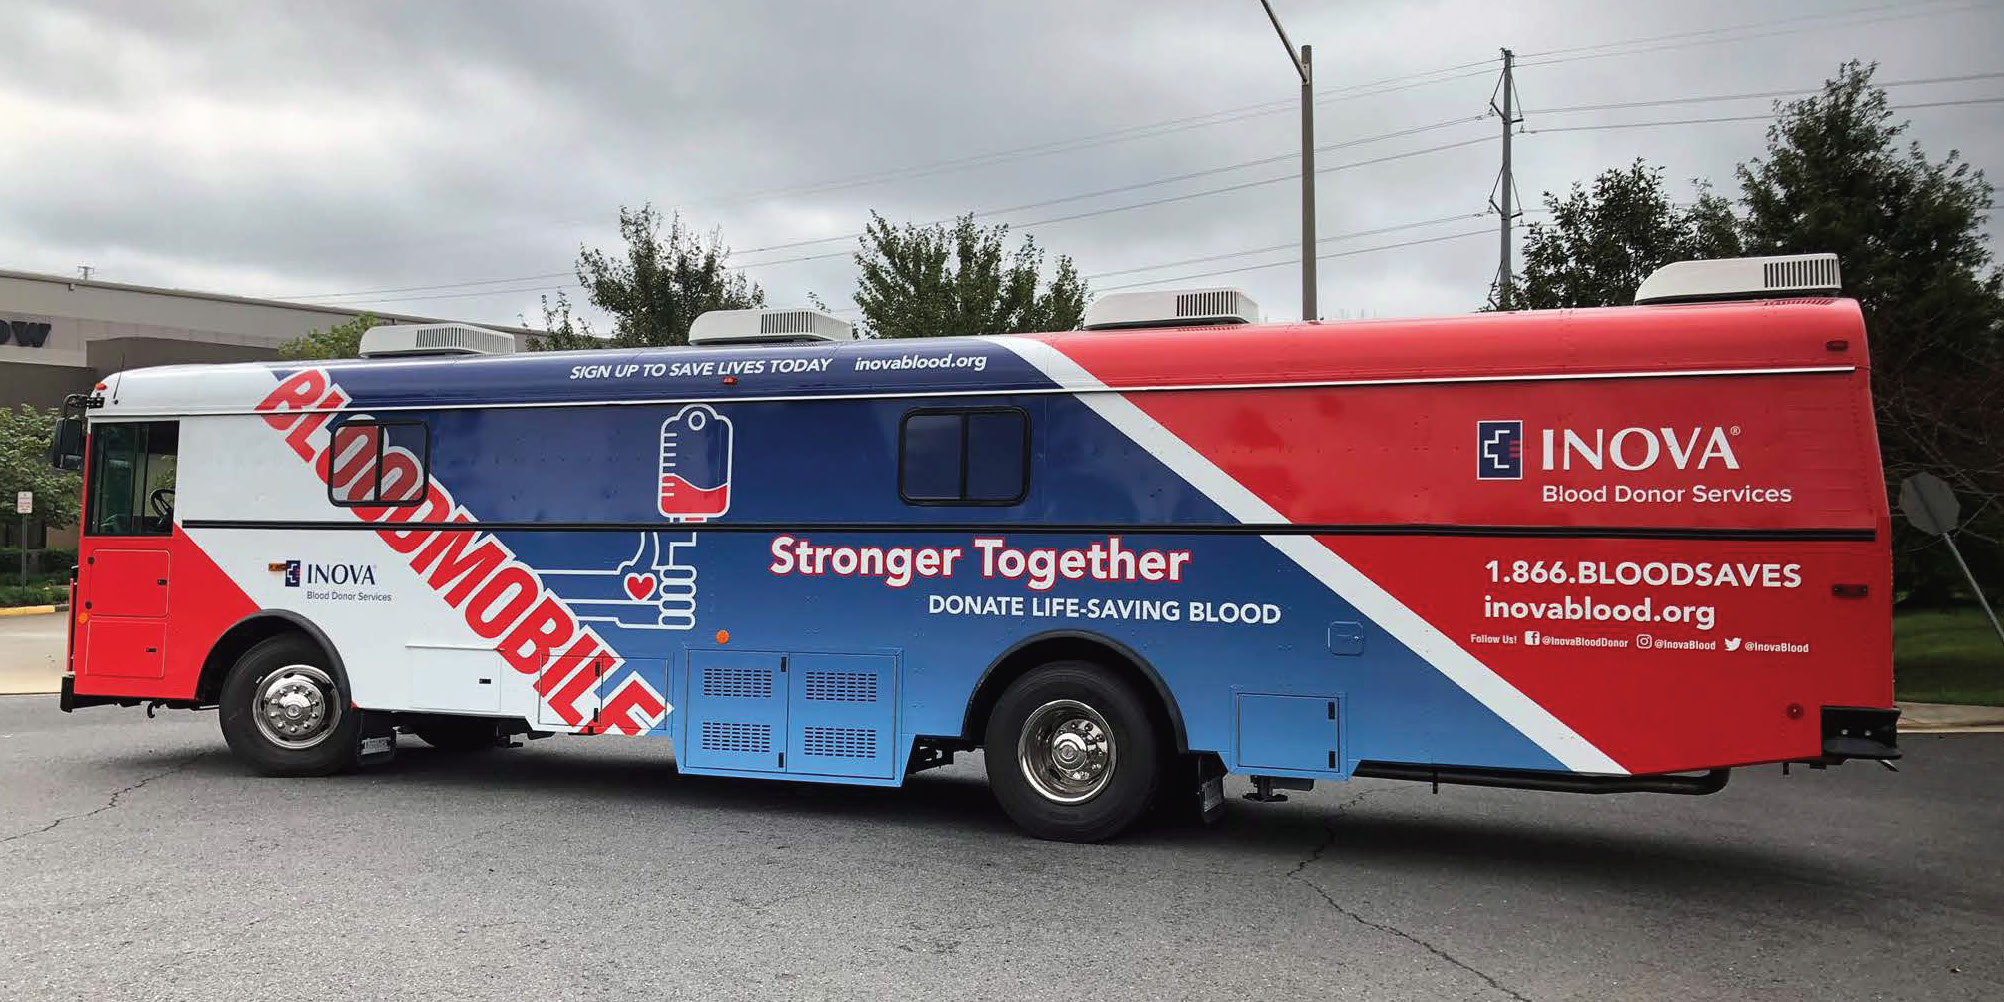 big bus decorated red white and blue that says INOVA Bloodmobile